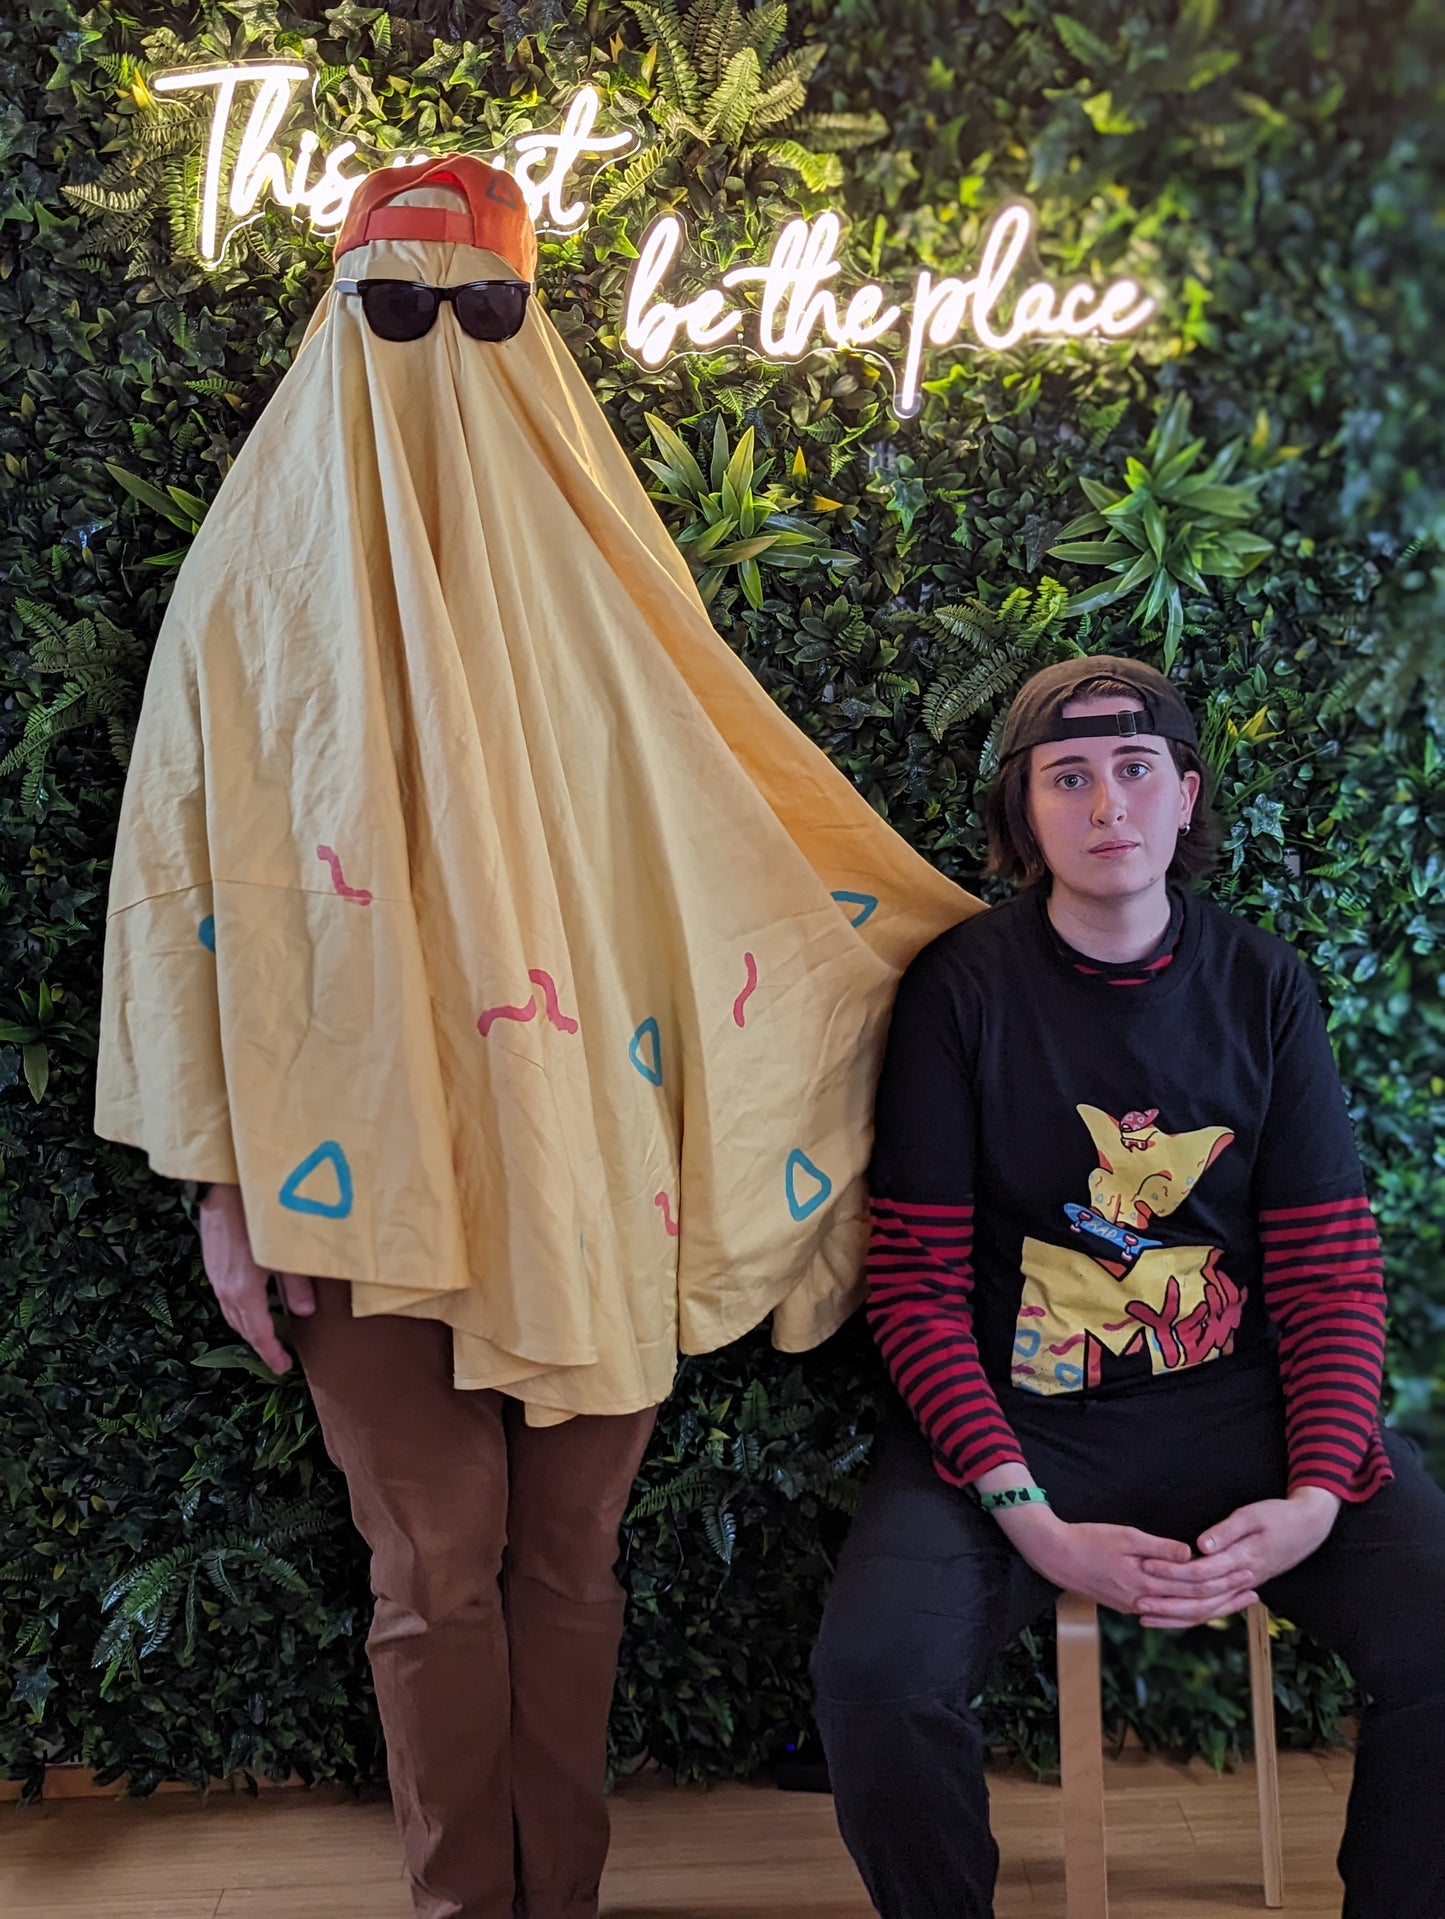 A ghost wearing a yellow sheet with an orange baseball cap, and cool mirrored sunglasses stands in front of a plant wall beside a person sitting on a stool wearing a black shirt with the character Rad Ghost skateboarding over top a large "M" and the word "yell" in the style of MTV. The images are in yellow with pops of Orange, blue and pink.